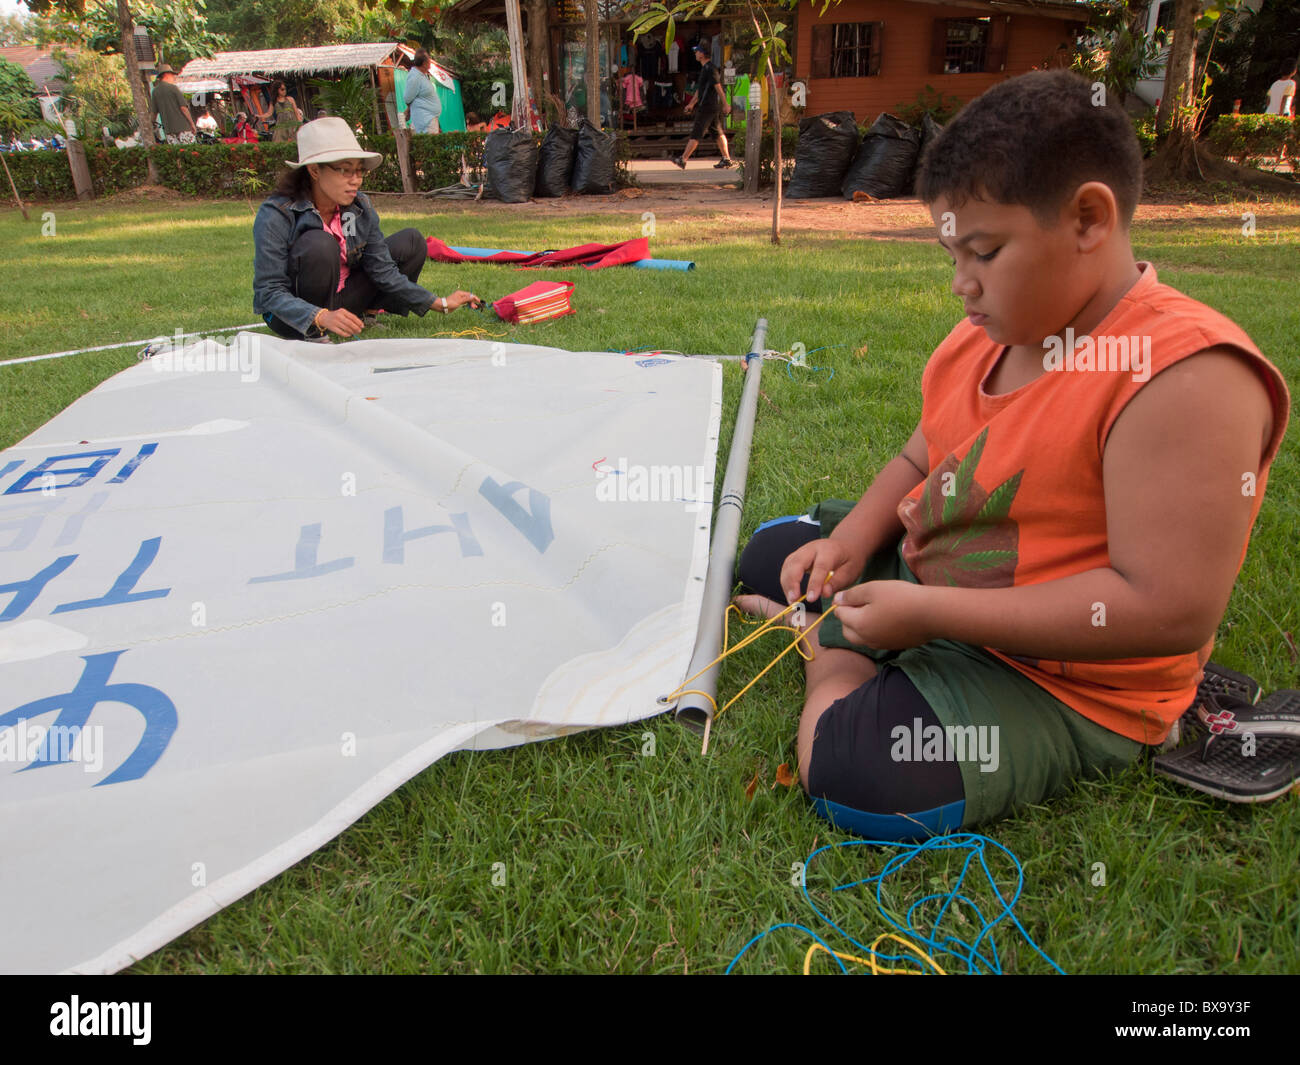 The boy and his mother rigging the optimist sail up together. Stock Photo